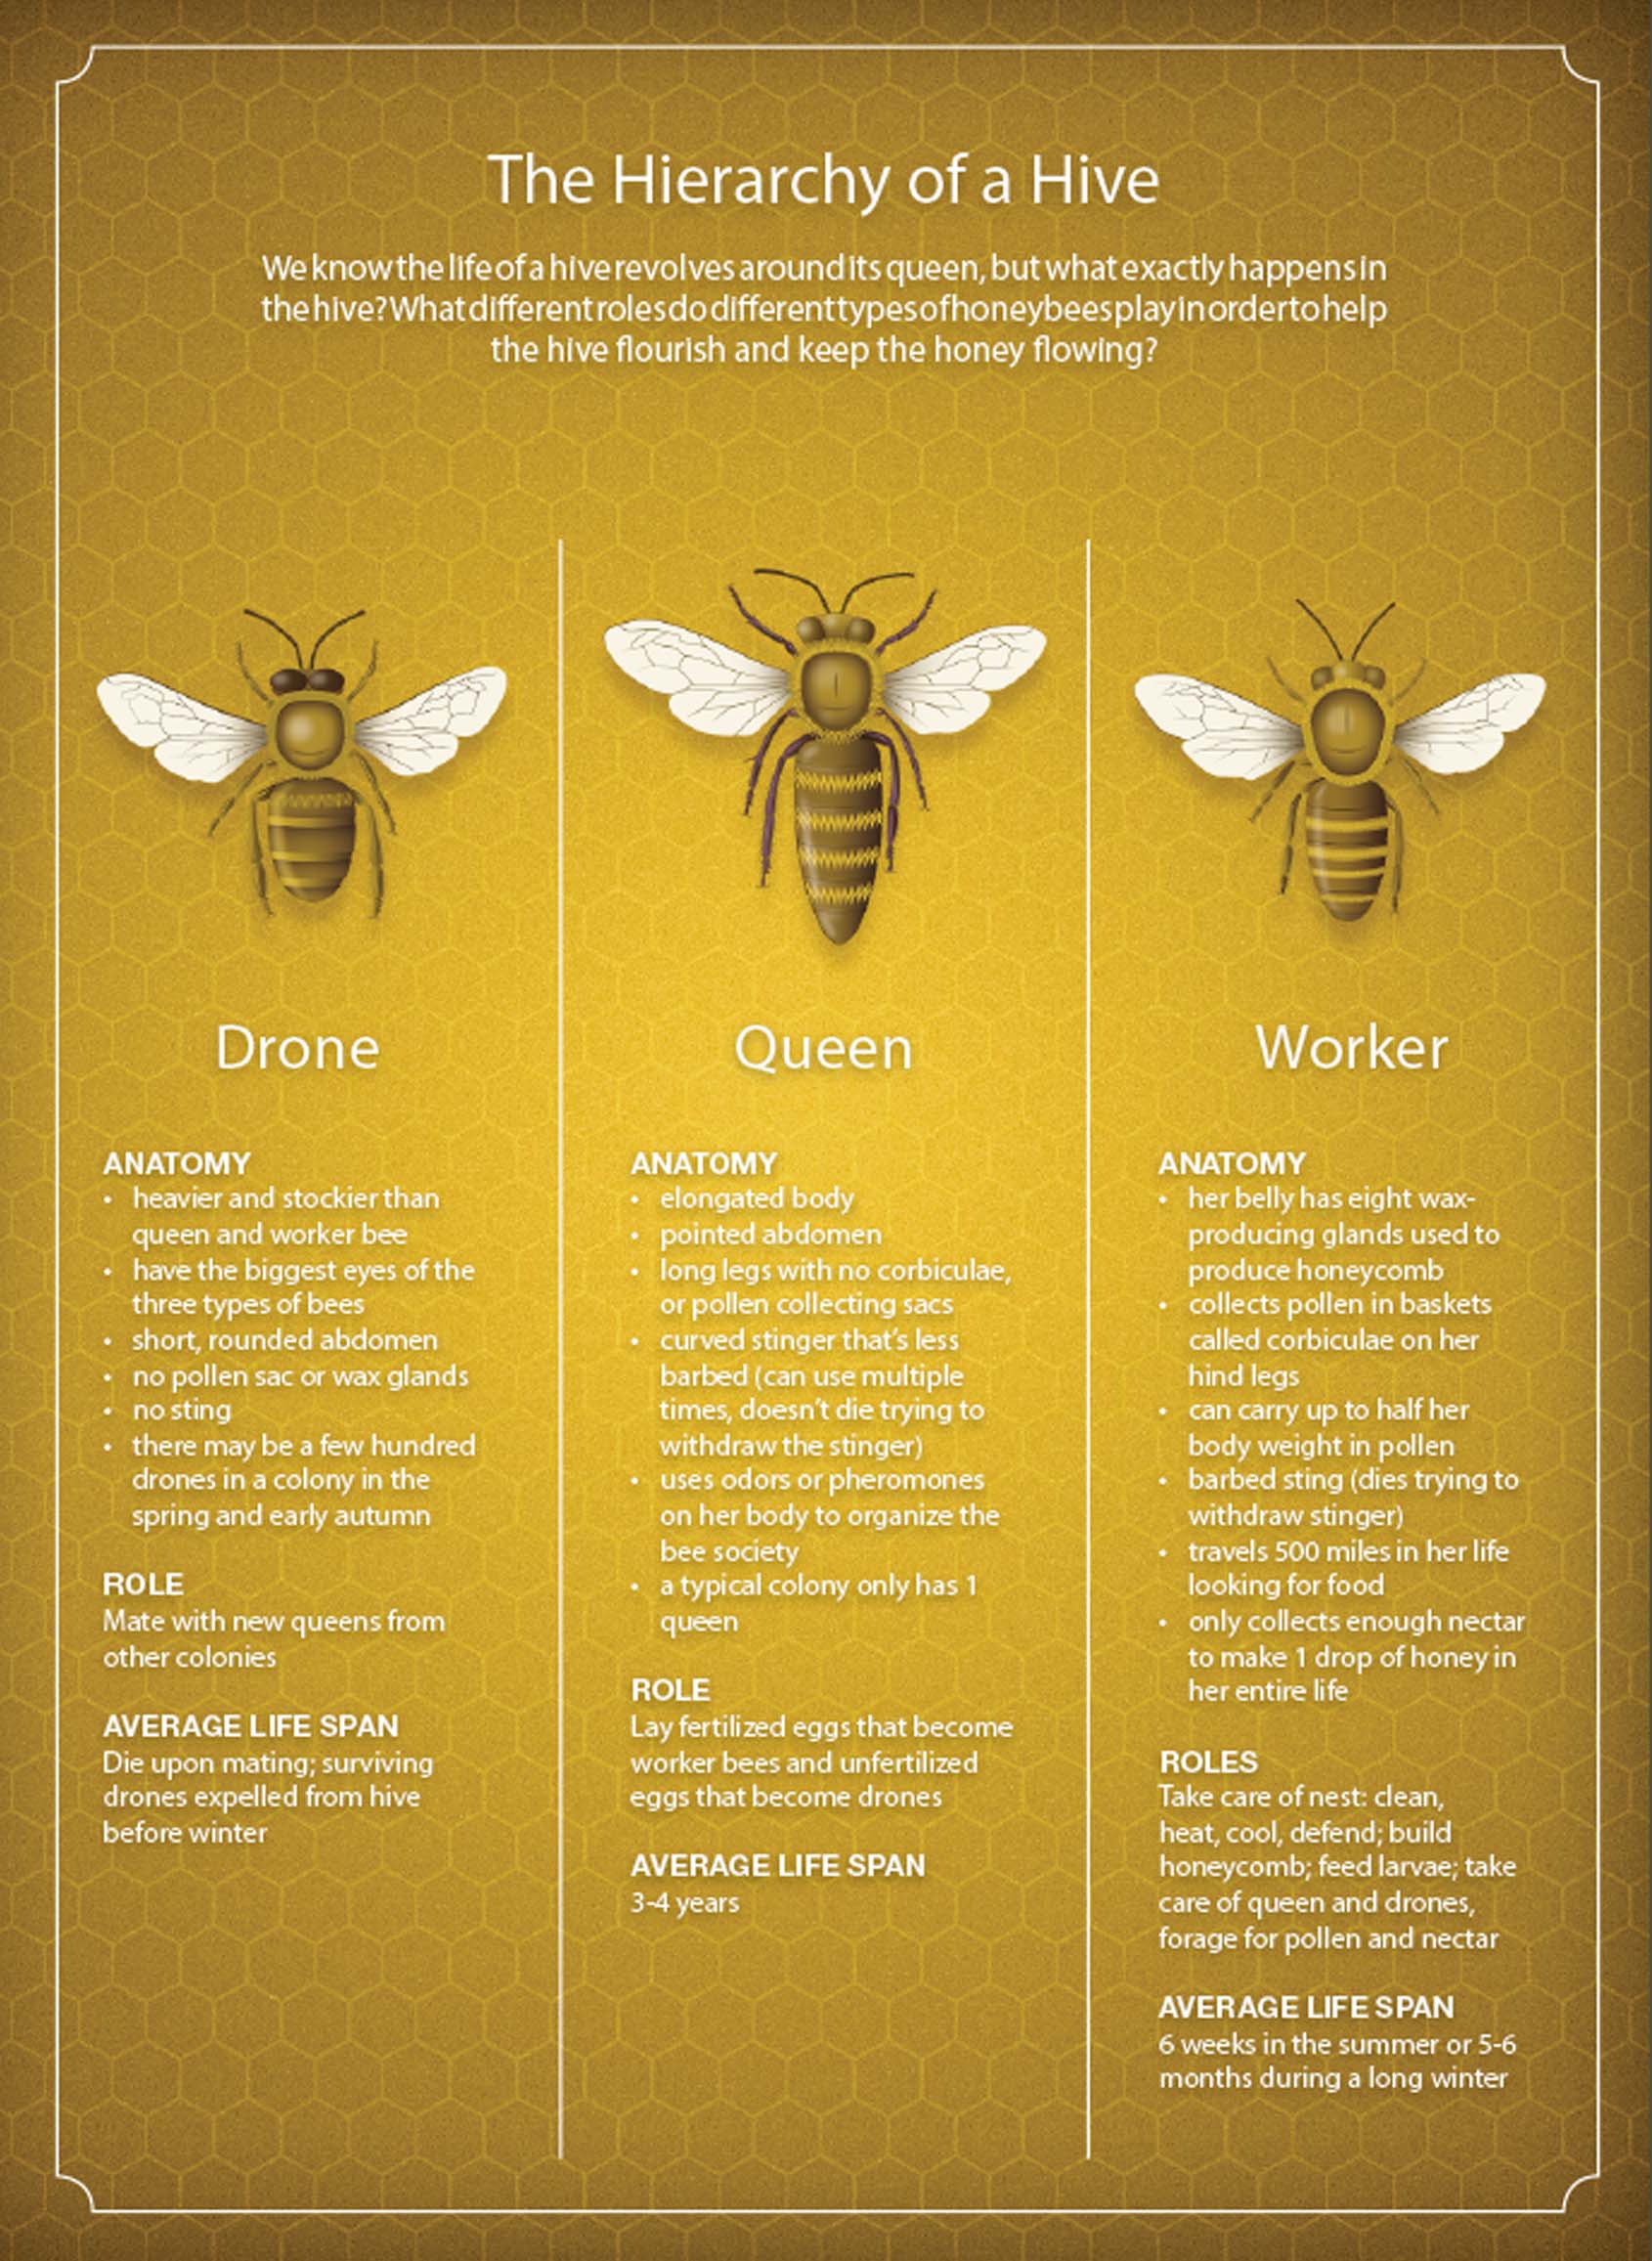 The Hierarchy of a Hive - We know the life of a hive revolves around its queen, but what exactly happens in the hive? What different roles do different types of honeybees play in order to help the hive flourish and keep the honey flowing?